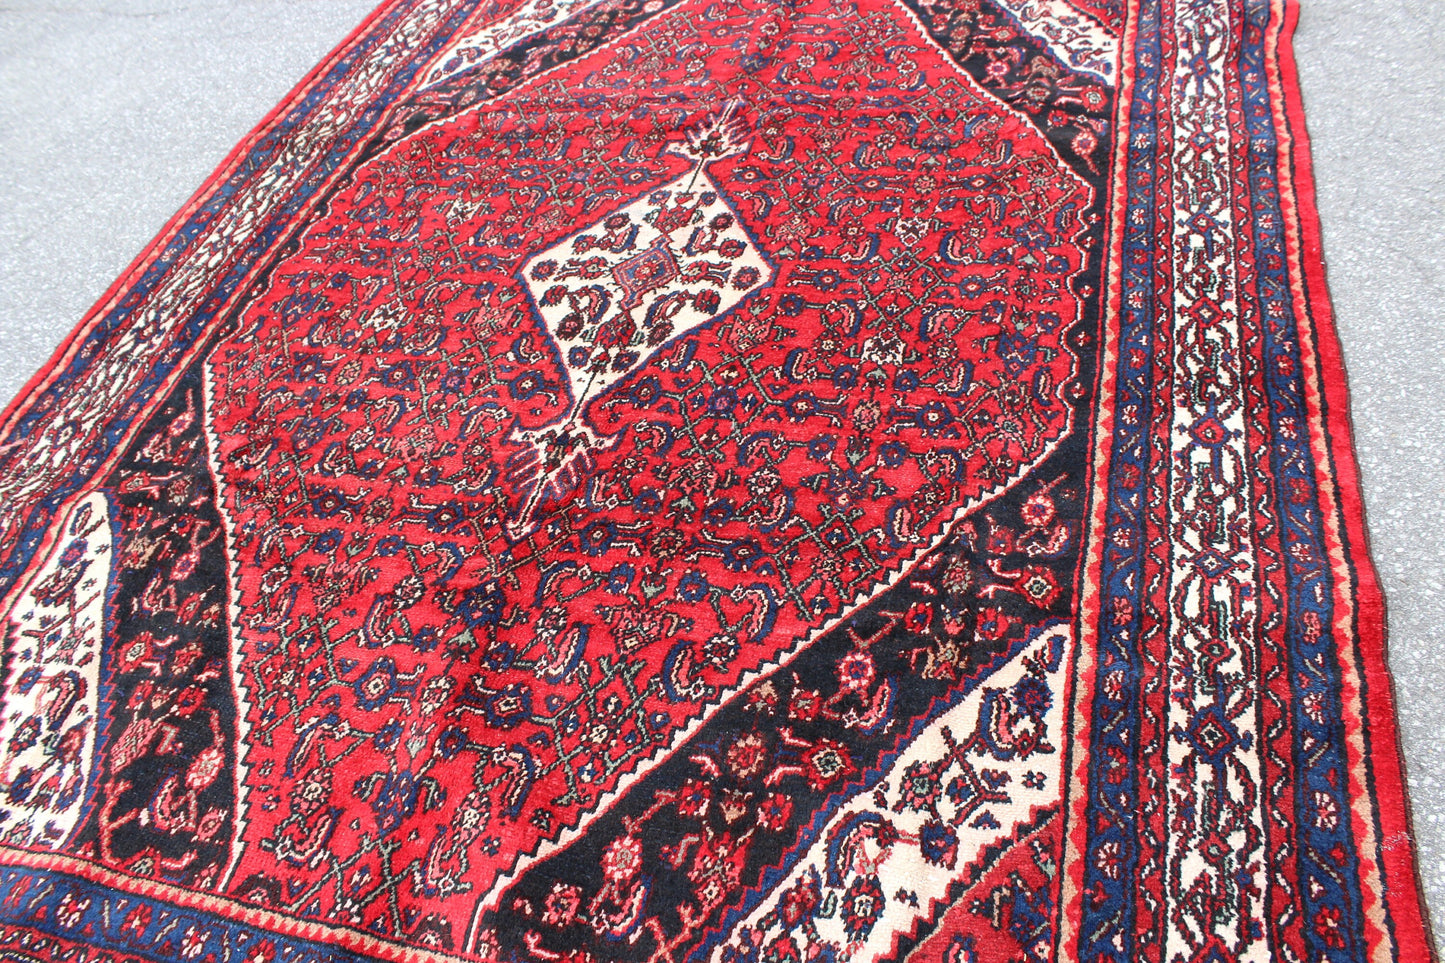 Bright Red Persian Style 7x10 Rug | Vintage Handmade